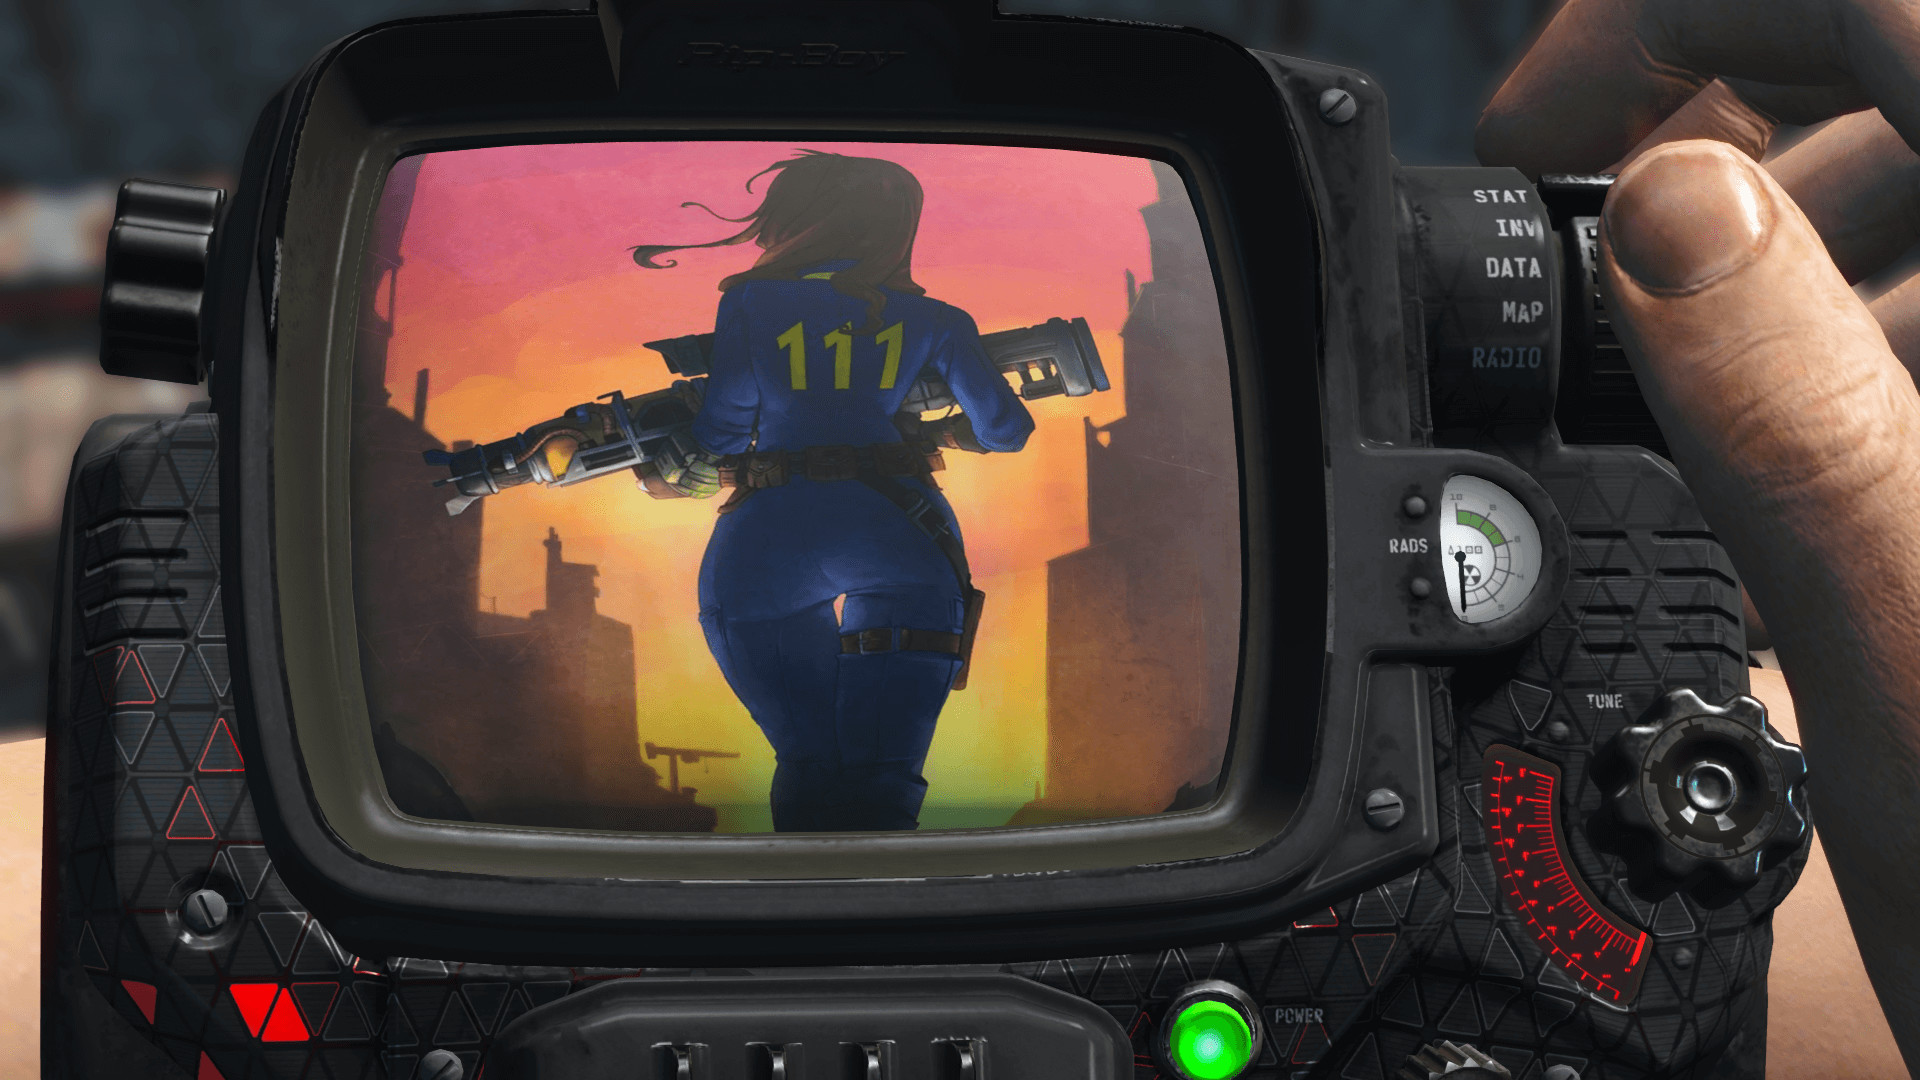 1920x1080 Sexy Fallout 4 Wallpapers for Desktop ( px, 0.58 Mb)